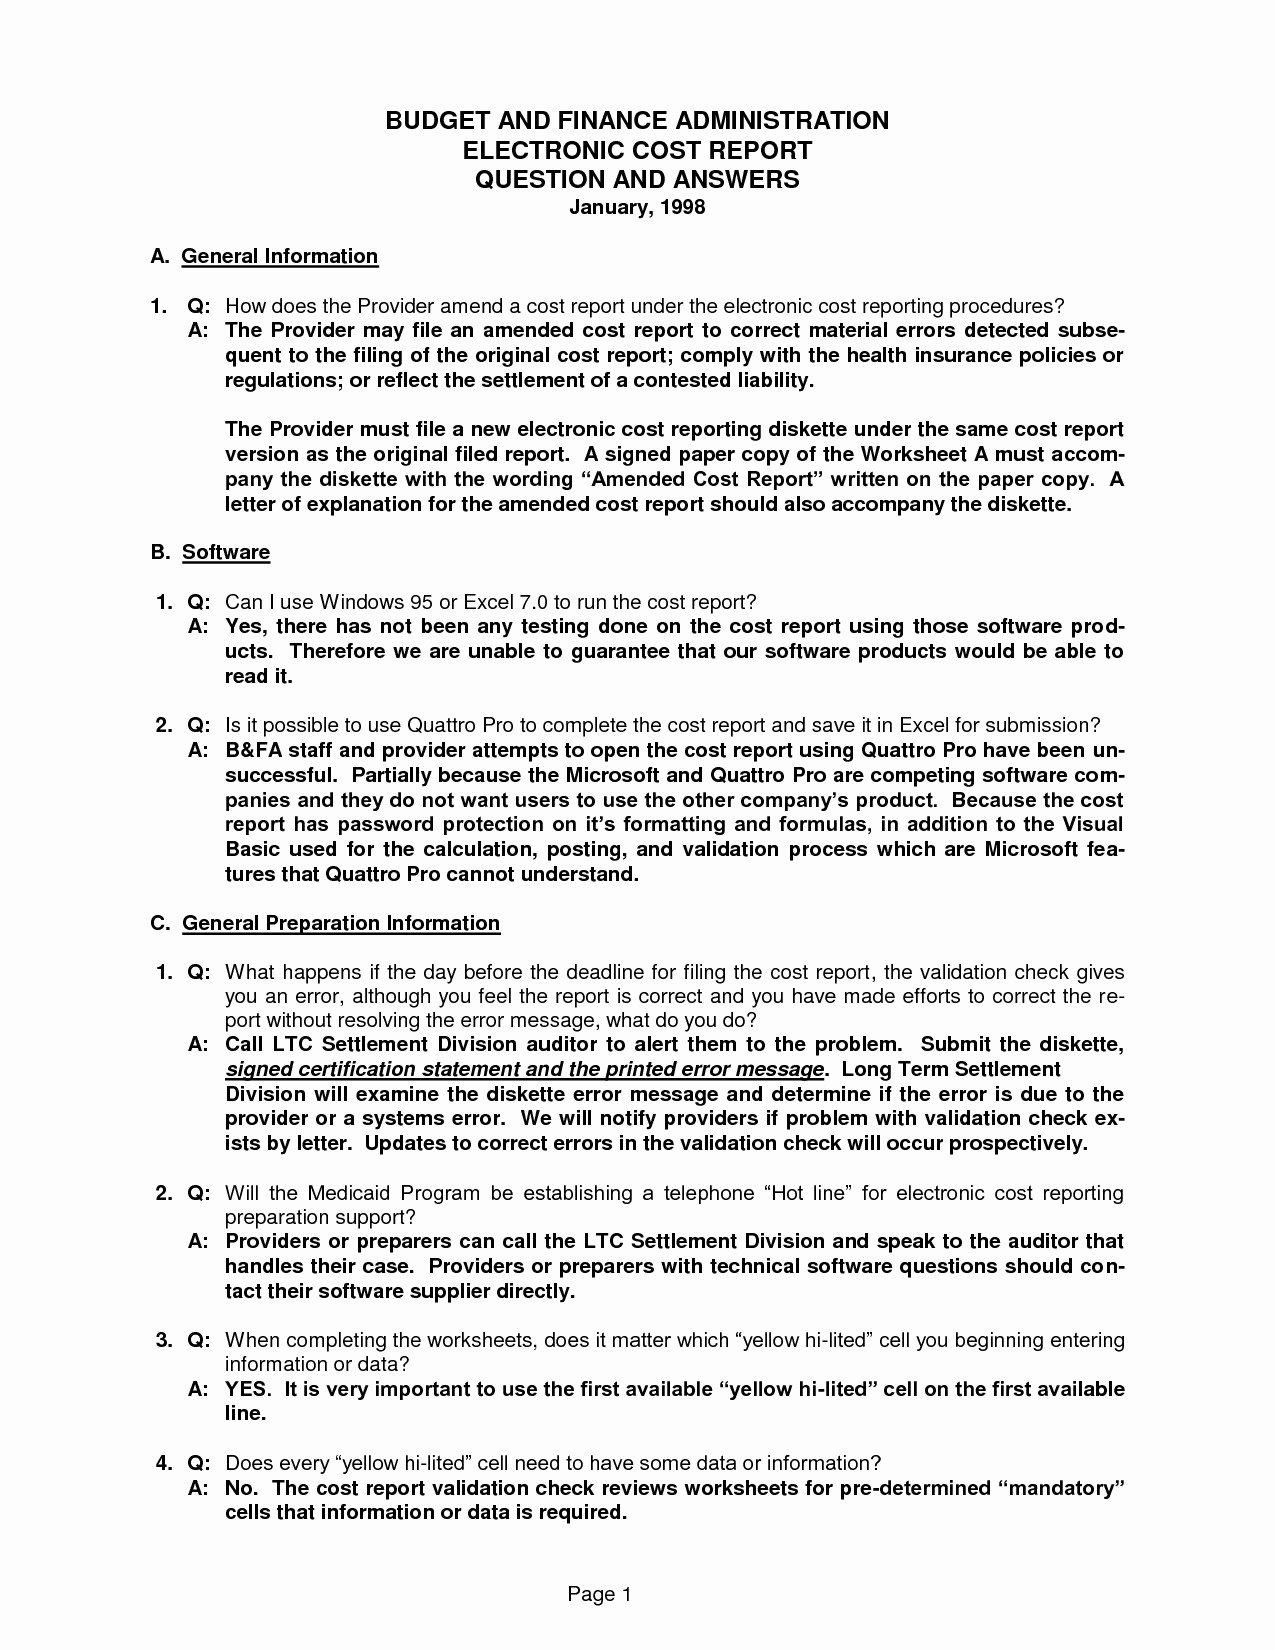 Chemistry Worksheet Matter 1 Answers Lovely March 2019 Archives Incredible Chemistry Worksheet